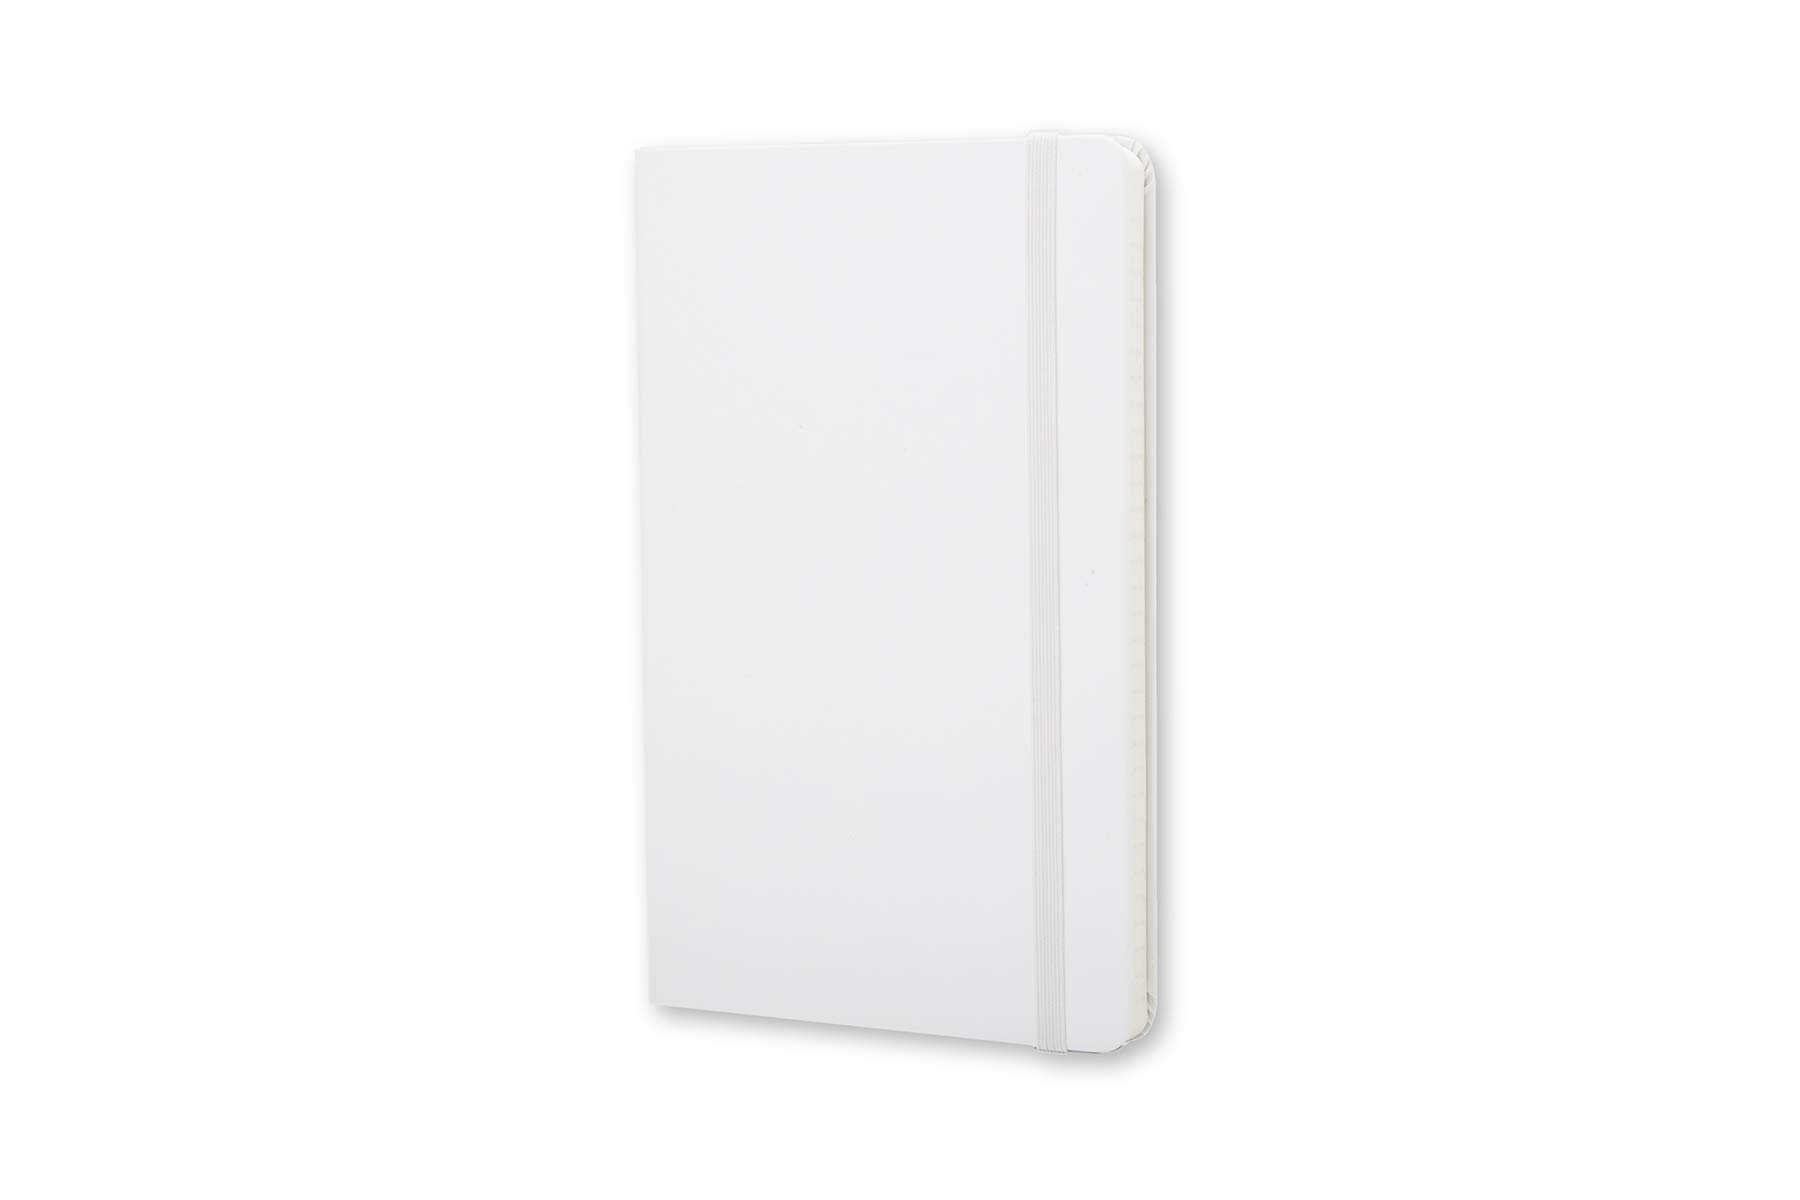 Moleskine Classic Notebook, Hard Cover, Large (5" x 8.25") Ruled/Lined, White - $19.95